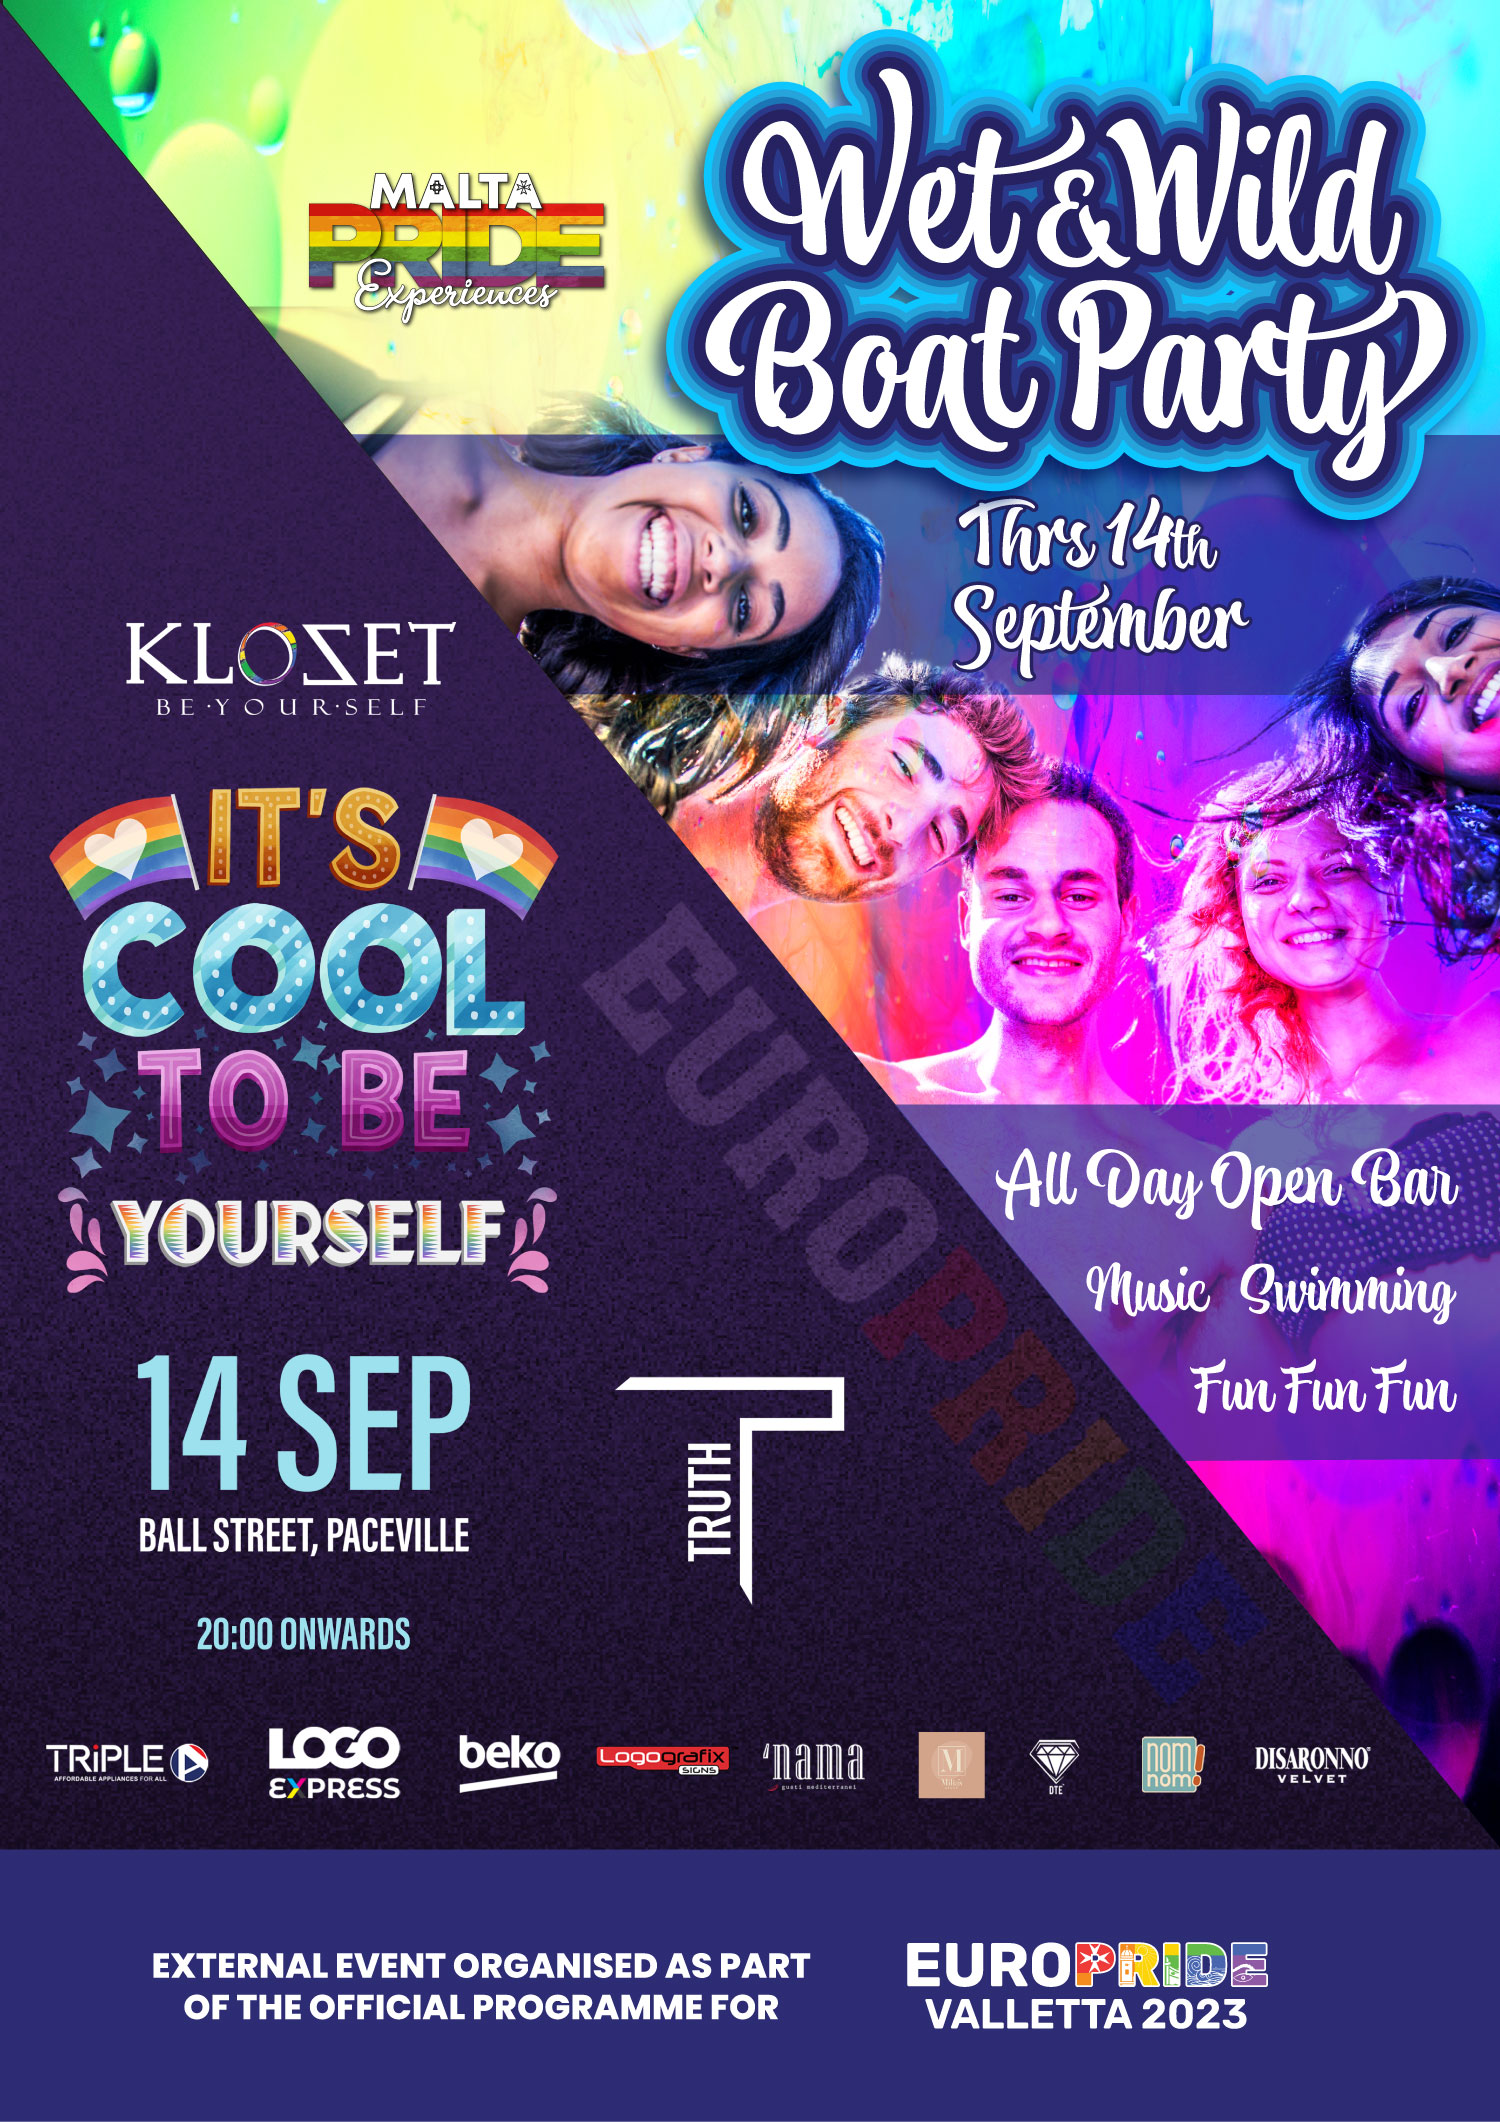 EUROPRIDE 2023 - Wet & Wild Boat Party & It's COOL to be YOURSELF Party poster